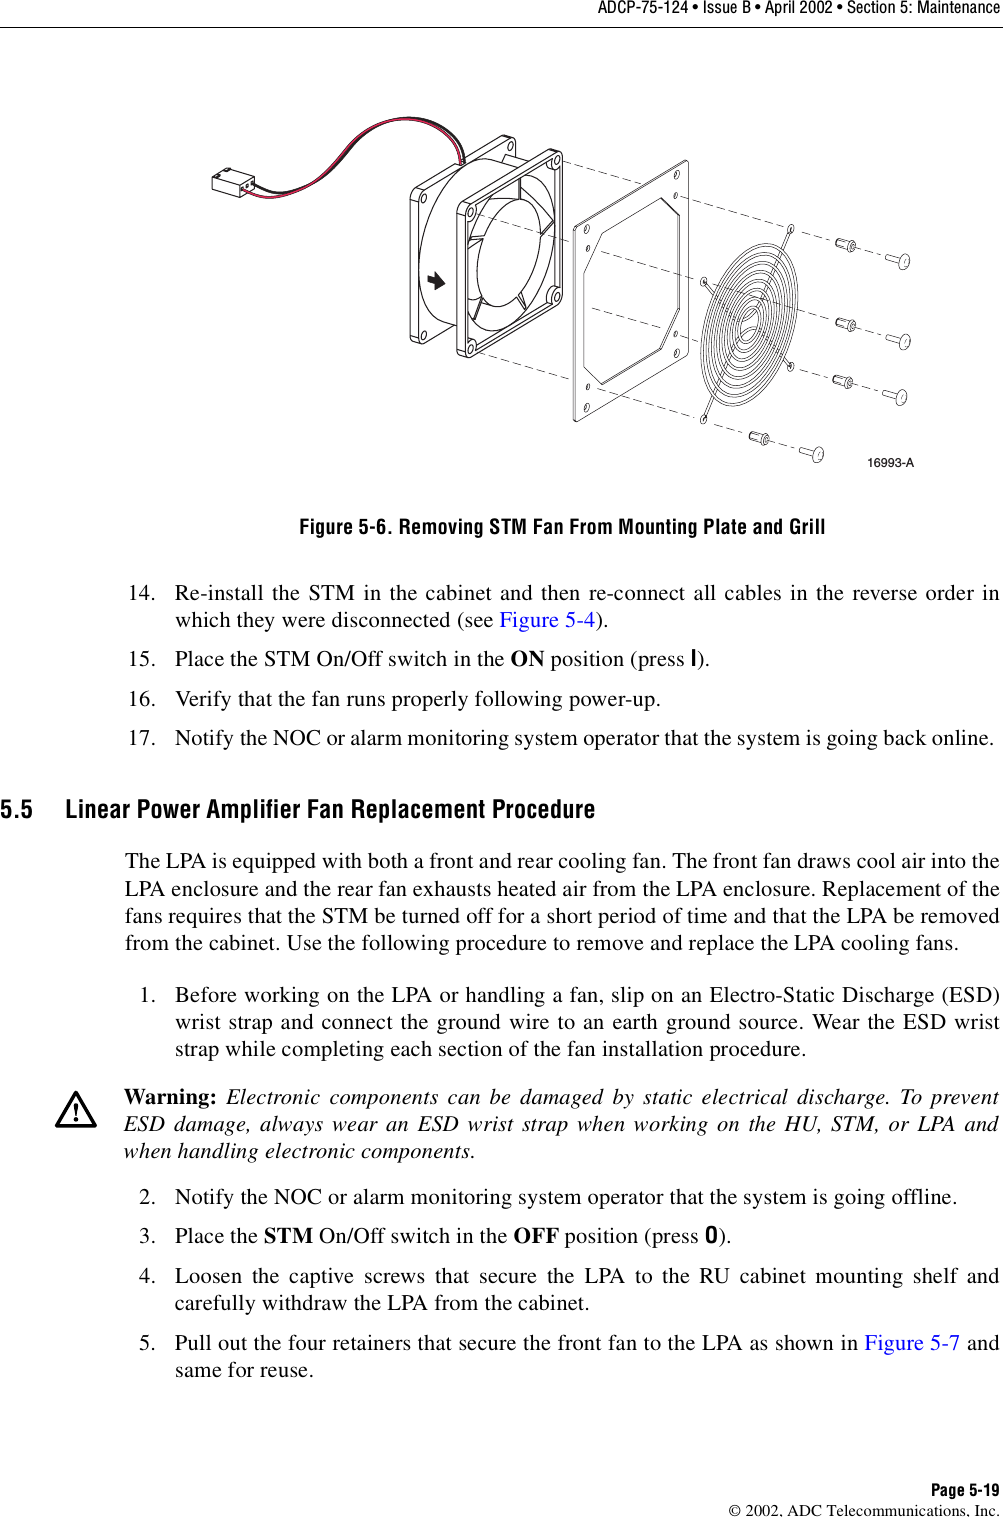 ADCP-75-124 • Issue B • April 2002 • Section 5: MaintenancePage 5-19©2002, ADC Telecommunications, Inc.Figure 5-6. Removing STM Fan From Mounting Plate and Grill14. Re-install the STM in the cabinet and then re-connect all cables in the reverse order inwhich they were disconnected (see Figure 5-4).15. Place the STM On/Off switch in the ON position (press I).16. Verify that the fan runs properly following power-up.17. Notify the NOC or alarm monitoring system operator that the system is going back online.5.5 Linear Power Amplifier Fan Replacement ProcedureThe LPA is equipped with both afront and rear cooling fan. The front fan draws cool air into theLPA enclosure and the rear fan exhausts heated air from the LPA enclosure. Replacement of thefans requires that the STM be turned off for ashort period of time and that the LPA be removedfrom the cabinet. Use the following procedure to remove and replace the LPA cooling fans.1. Before working on the LPA or handling afan, slip on an Electro-Static Discharge (ESD)wrist strap and connect the ground wire to an earth ground source. Wear the ESD wriststrap while completing each section of the fan installation procedure.2. Notify the NOC or alarm monitoring system operator that the system is going offline.3. Place the STM On/Off switch in the OFF position (press O).4. Loosen the captive screws that secure the LPA to the RU cabinet mounting shelf andcarefully withdraw the LPA from the cabinet.5. Pull out the four retainers that secure the front fan to the LPA as shown in Figure 5-7 andsame for reuse.Warning: Electronic components can be damaged by static electrical discharge. To preventESD damage, always wear an ESD wrist strap when working on the HU, STM, or LPA andwhen handling electronic components.16993-A